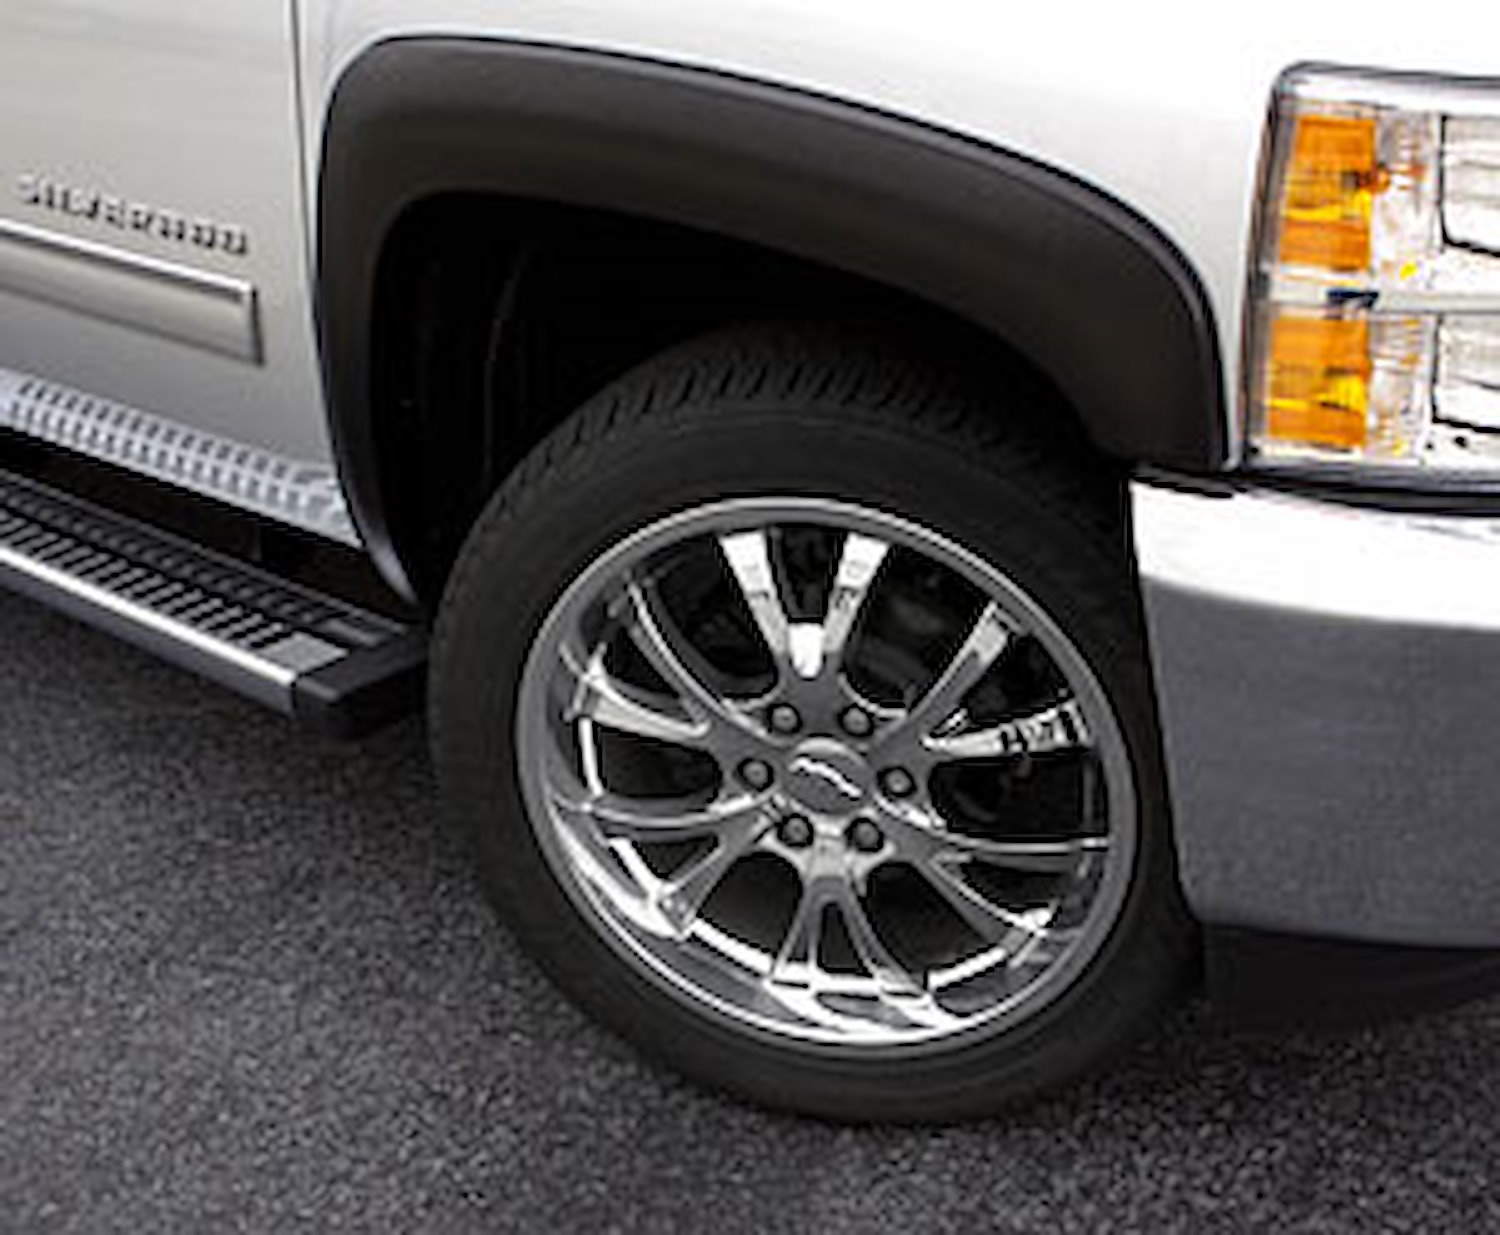 SX Sport-Style Fender Flares 1999-2007 Ford F-Series Super Duty